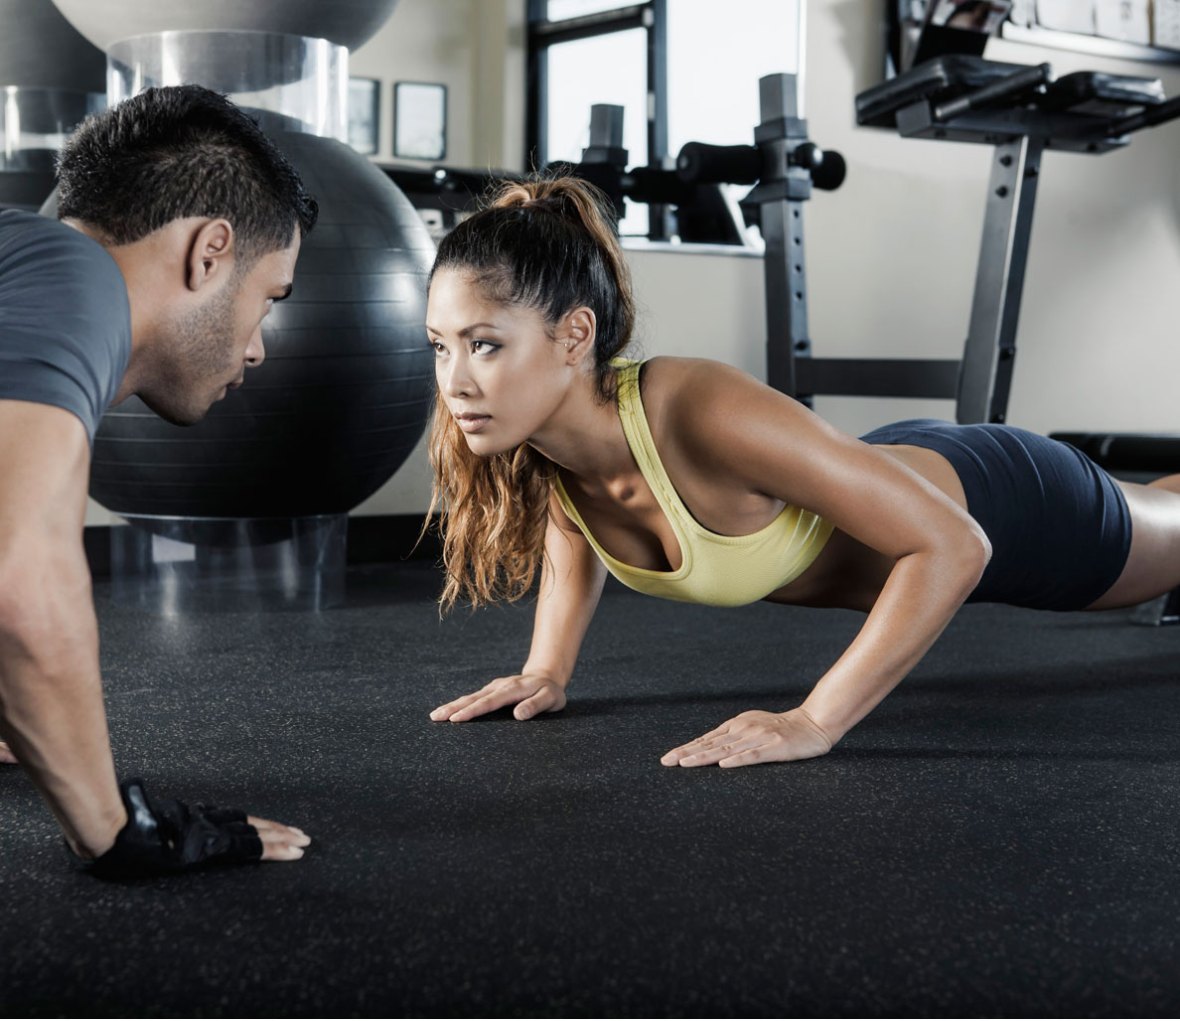 How to pick up women at the gym, according to women - Muscle & Fitness